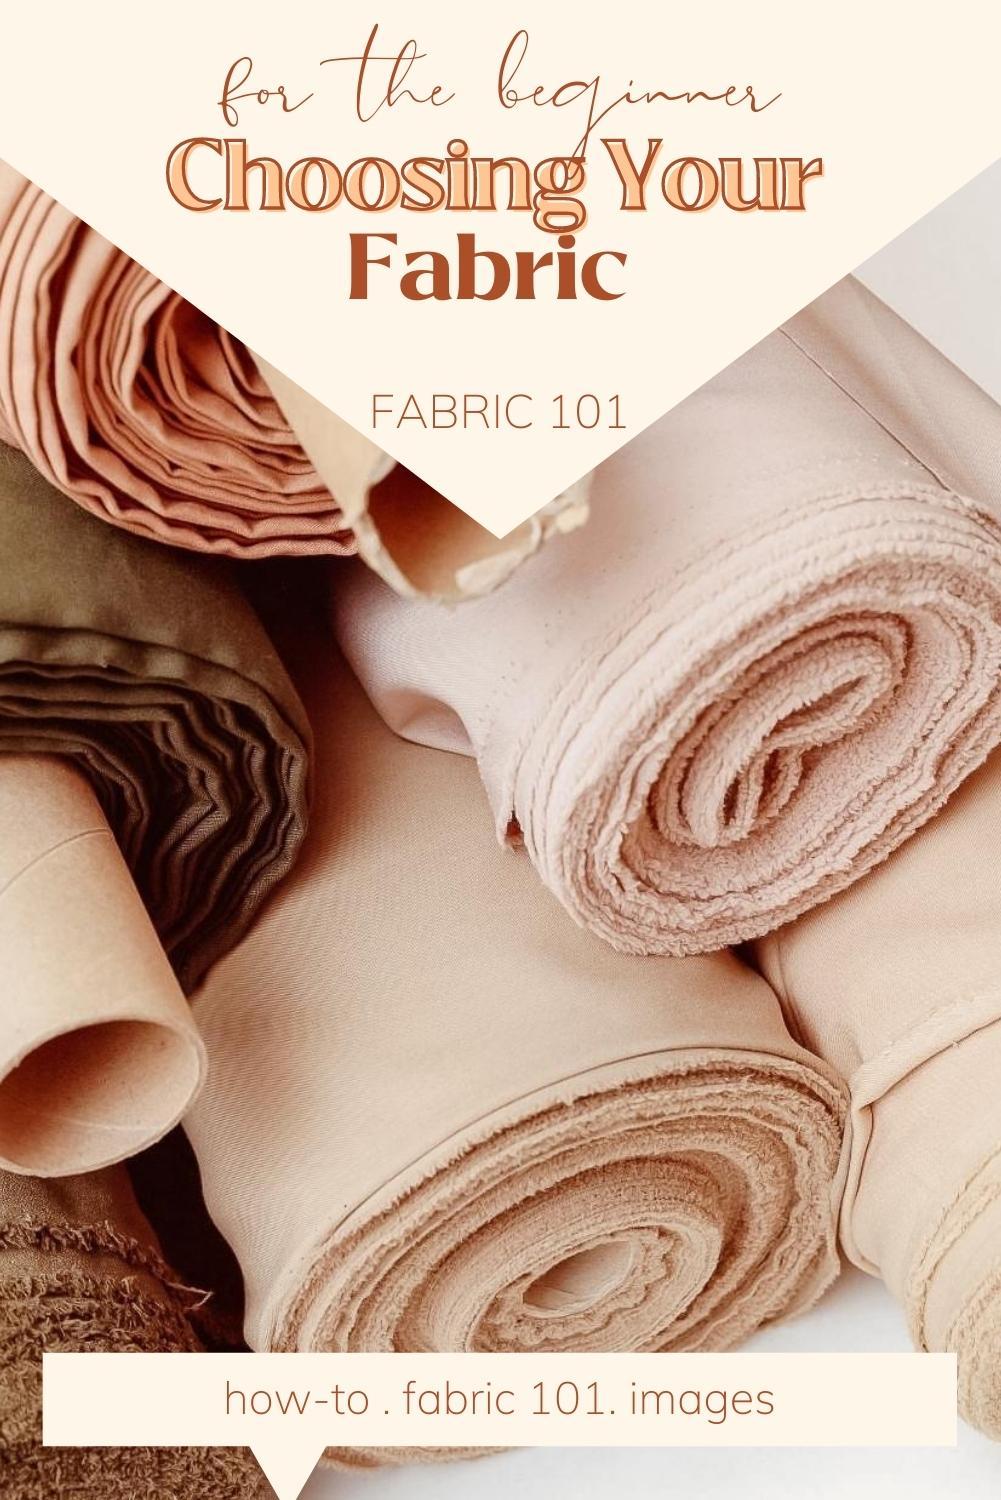 Choosing your fabric: for beginners